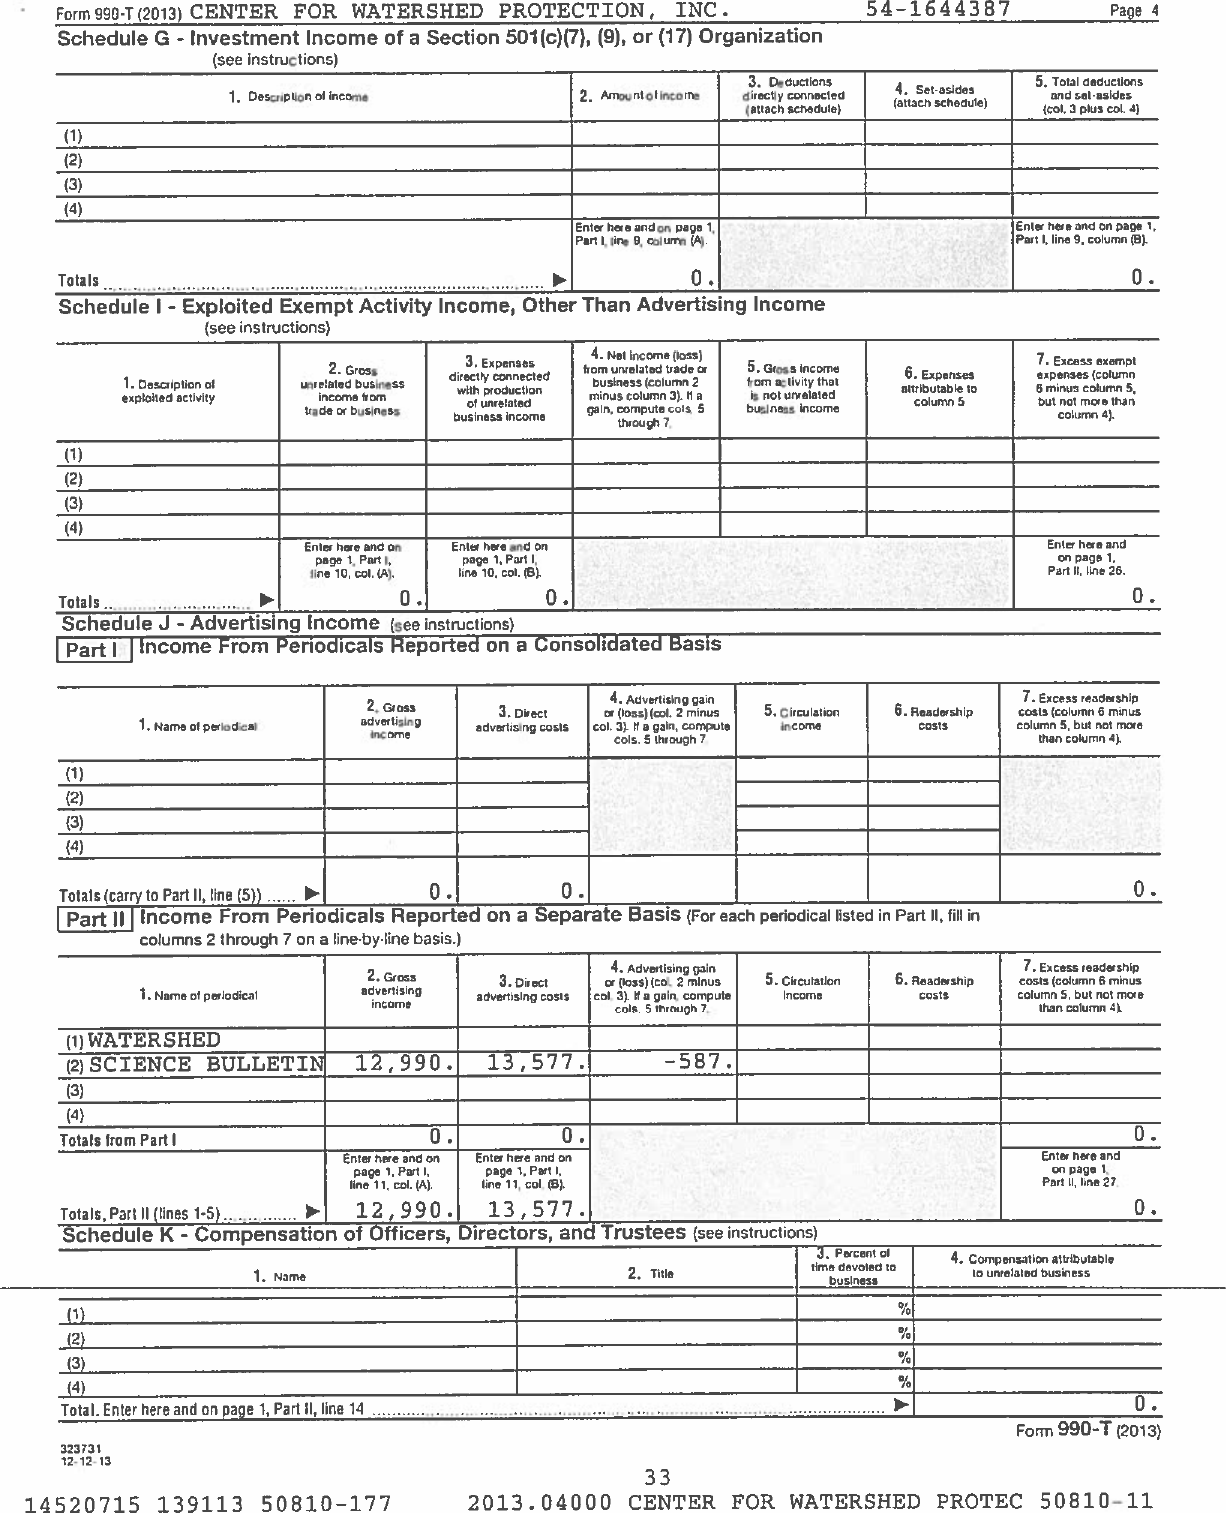 Page 4 of 5 - Form-990-T-2013